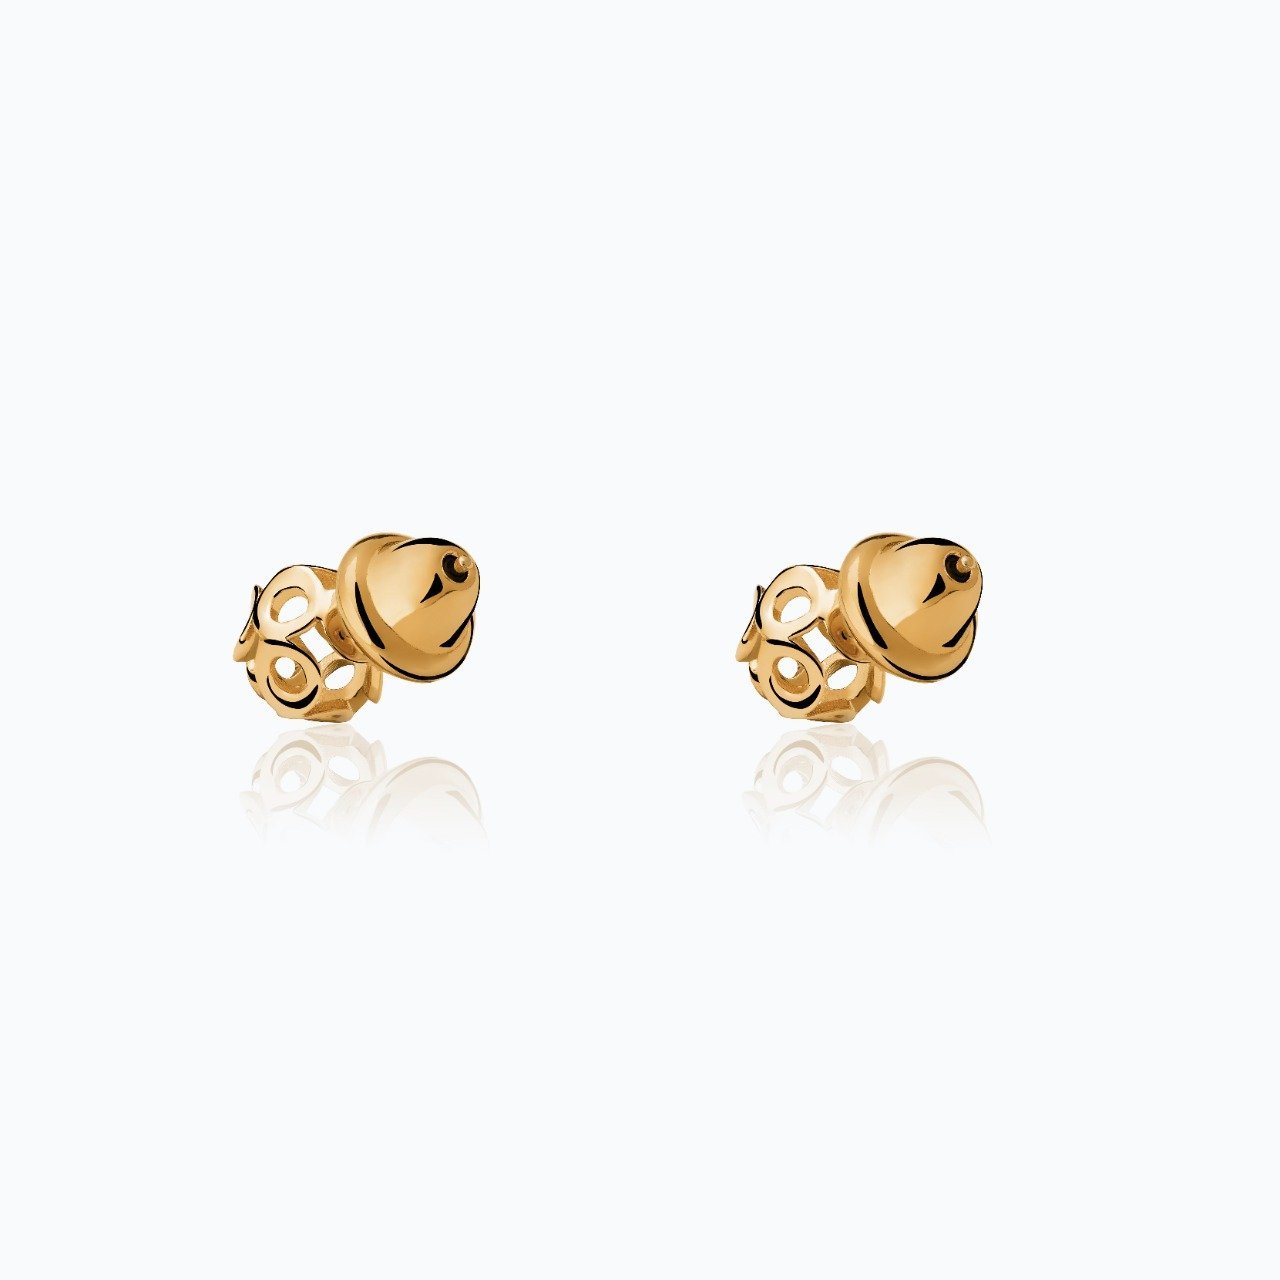 VOLCANO ROUND GOLD EARRINGS